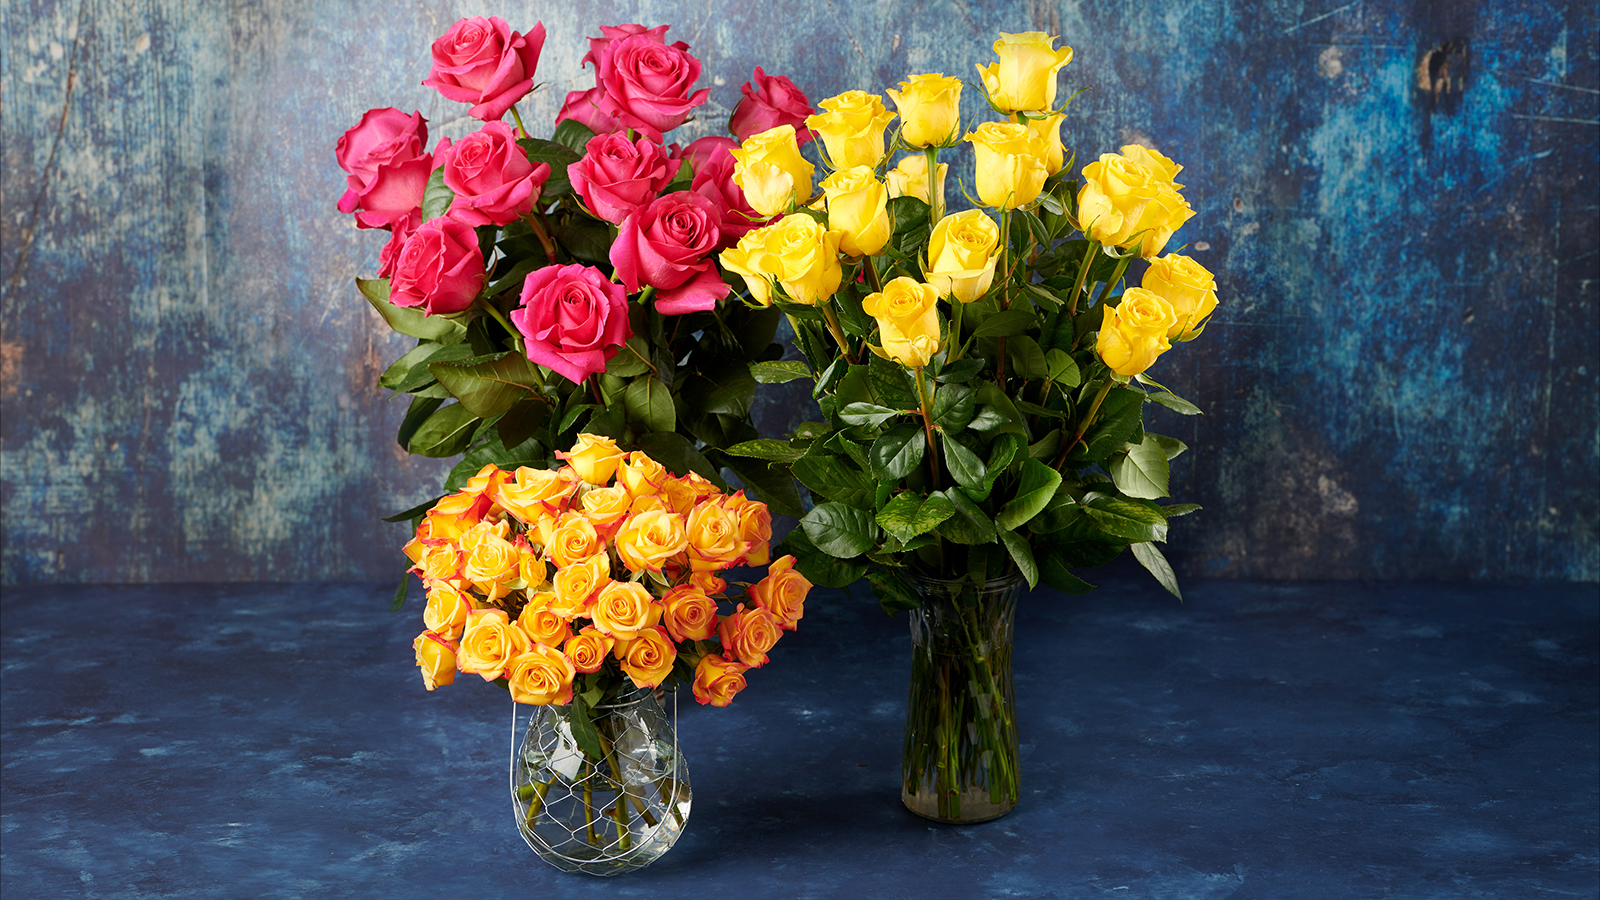 6 Places for the Best Florist in Boston for Flowers - Florist or